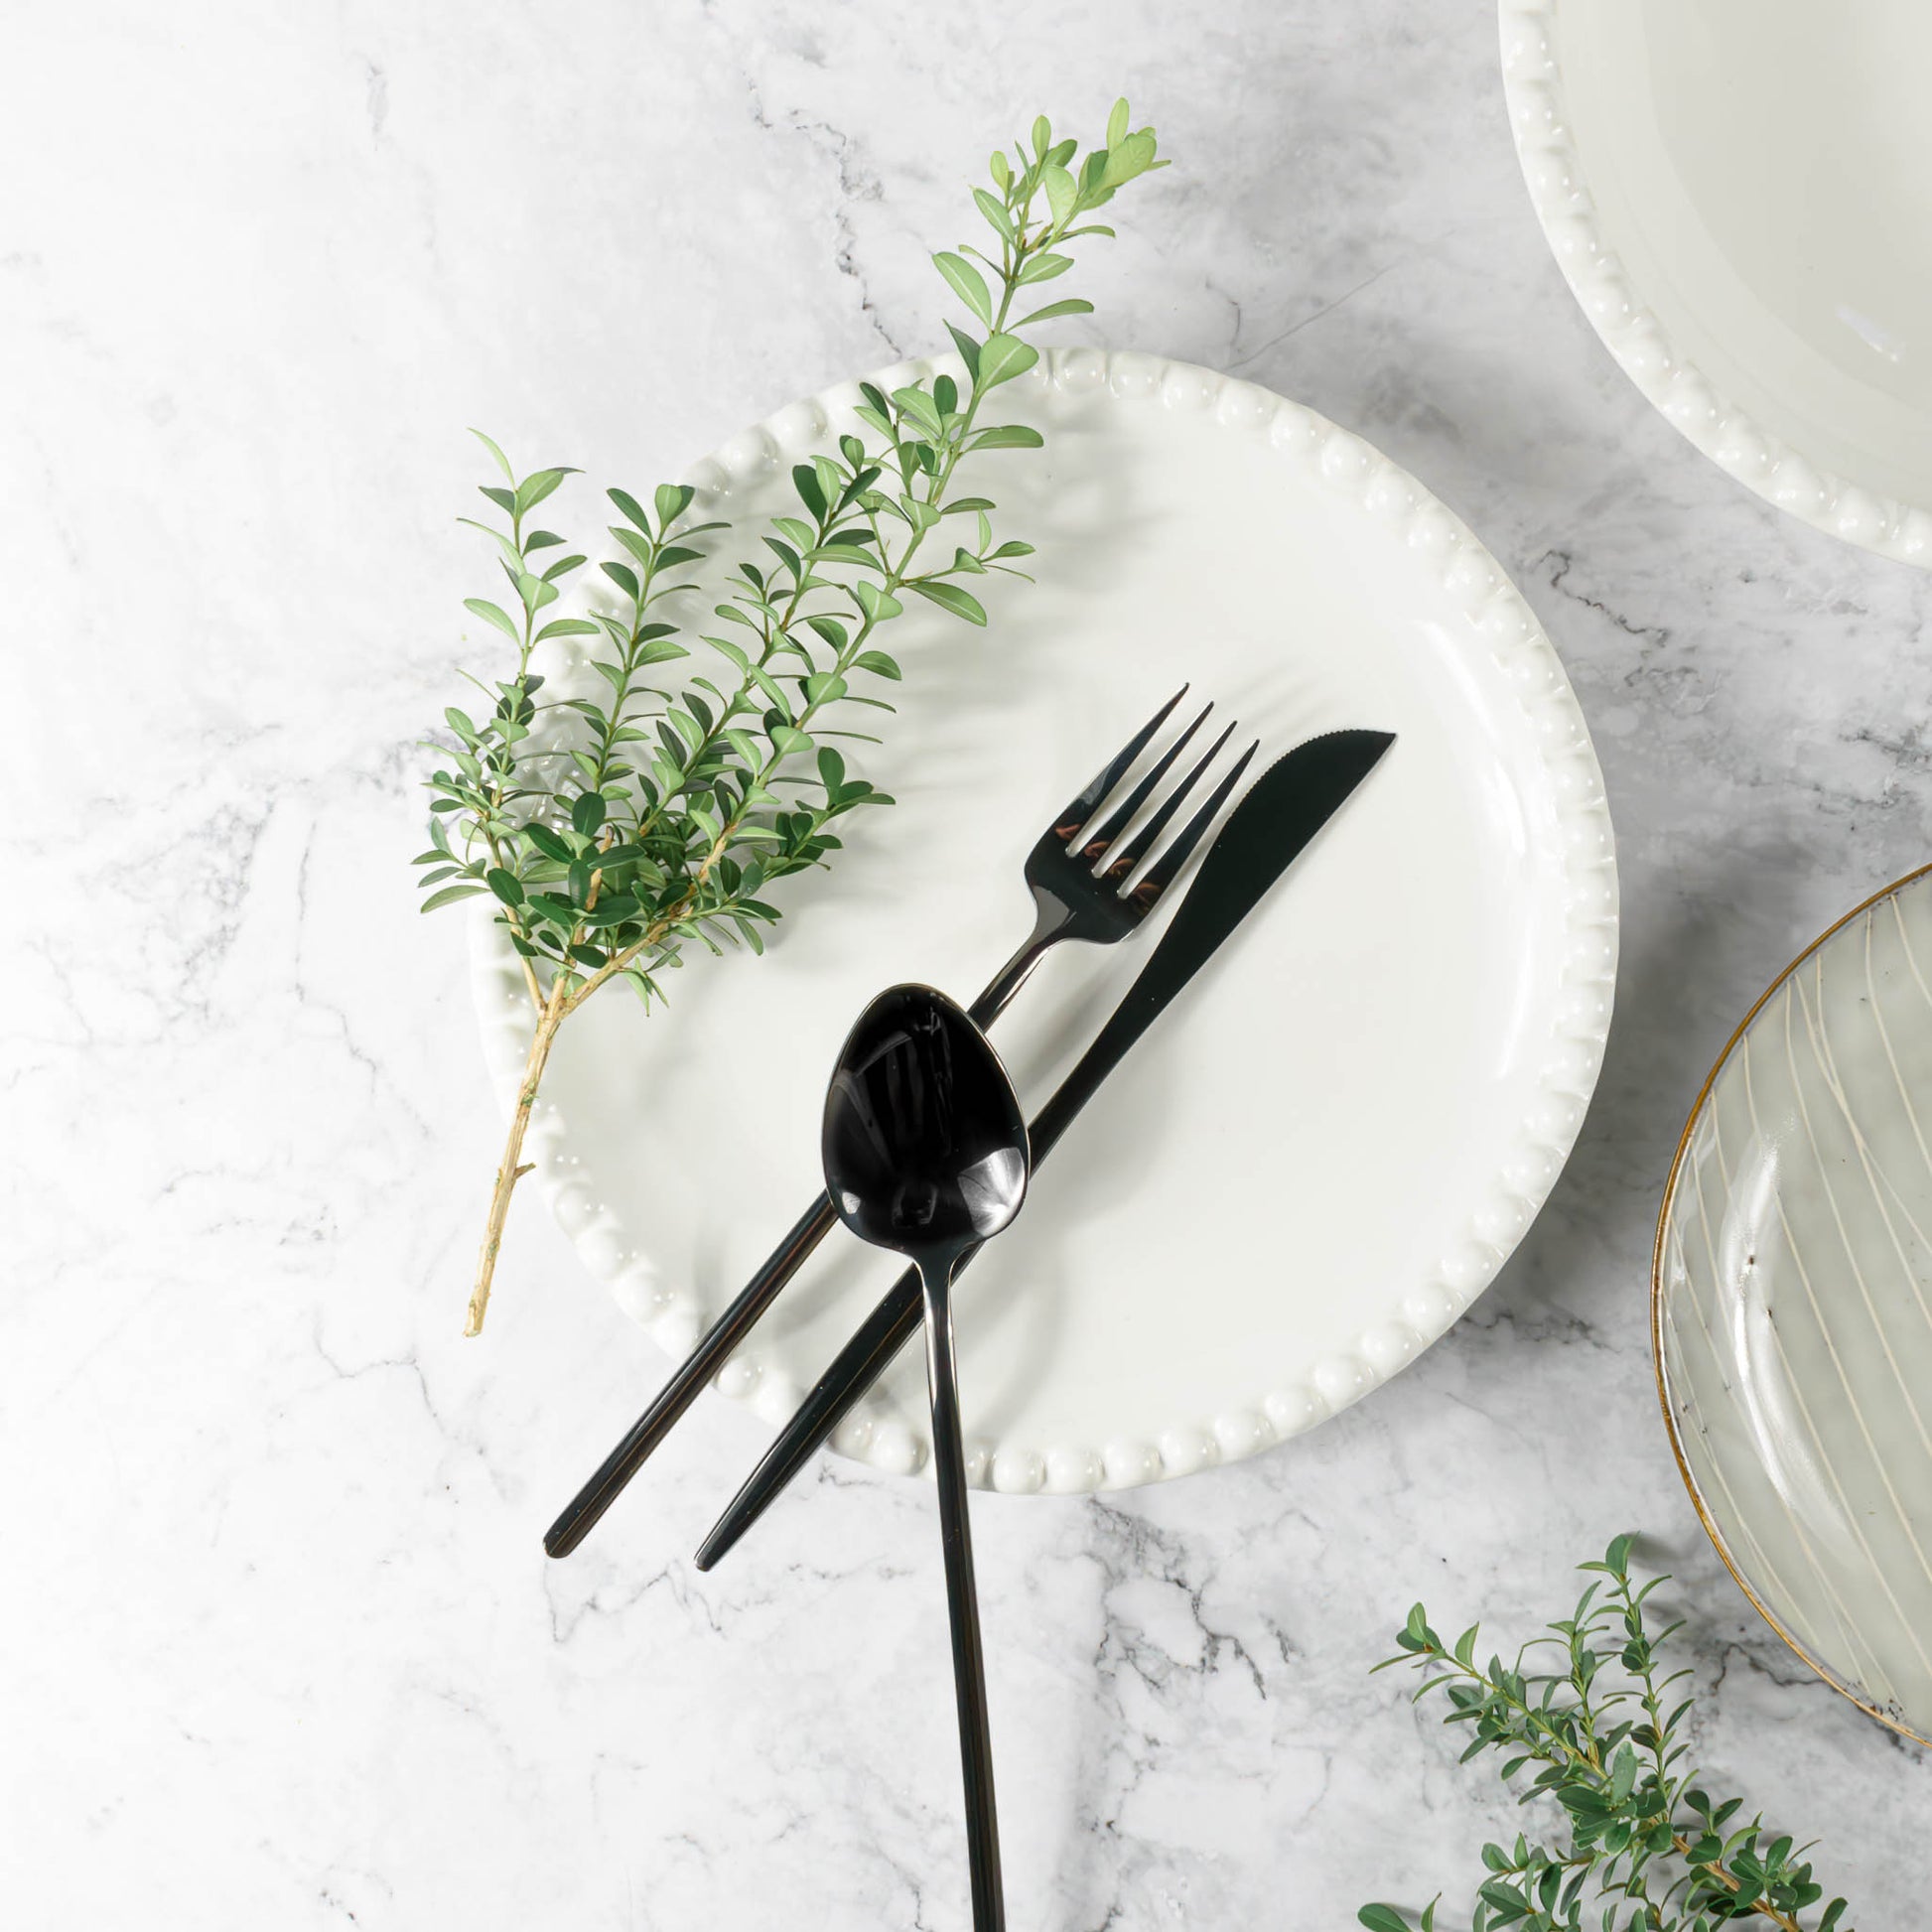 Flatware set in polished black, stylized on marble table with boxwood branches, plates, and bowls.